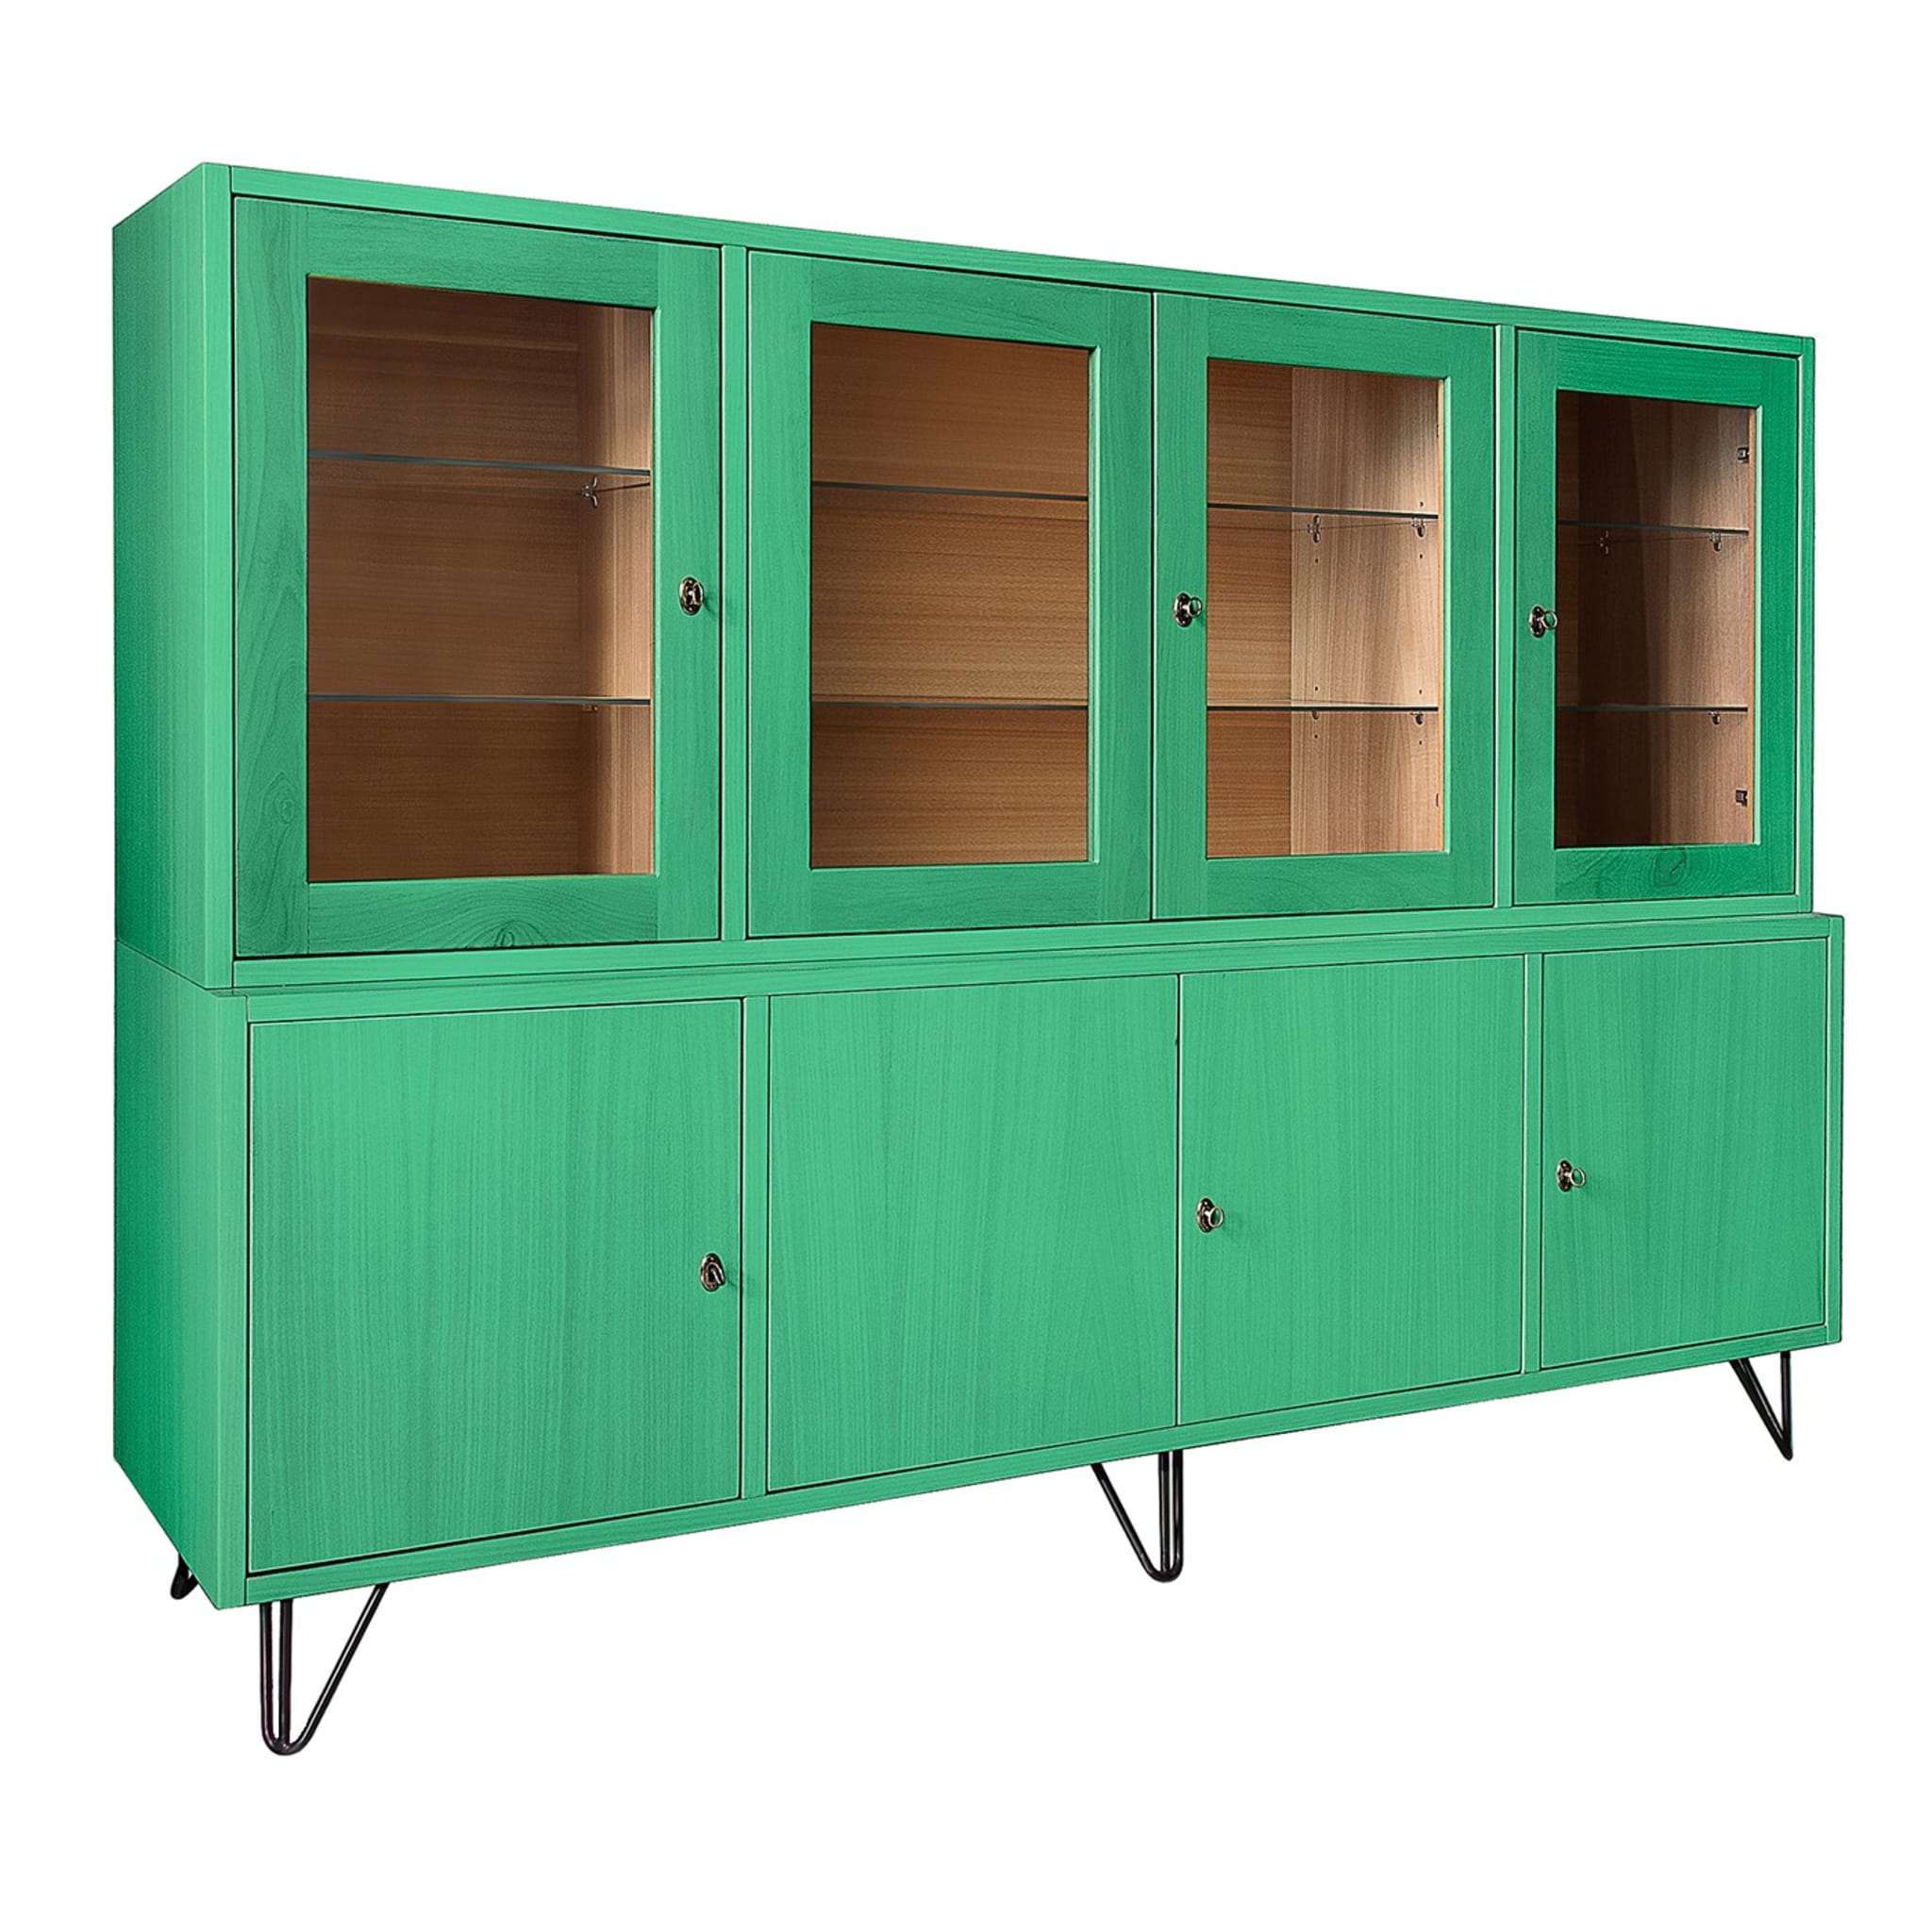 Eroica Mint Green Cabinet by Eugenio Gambella - Main view